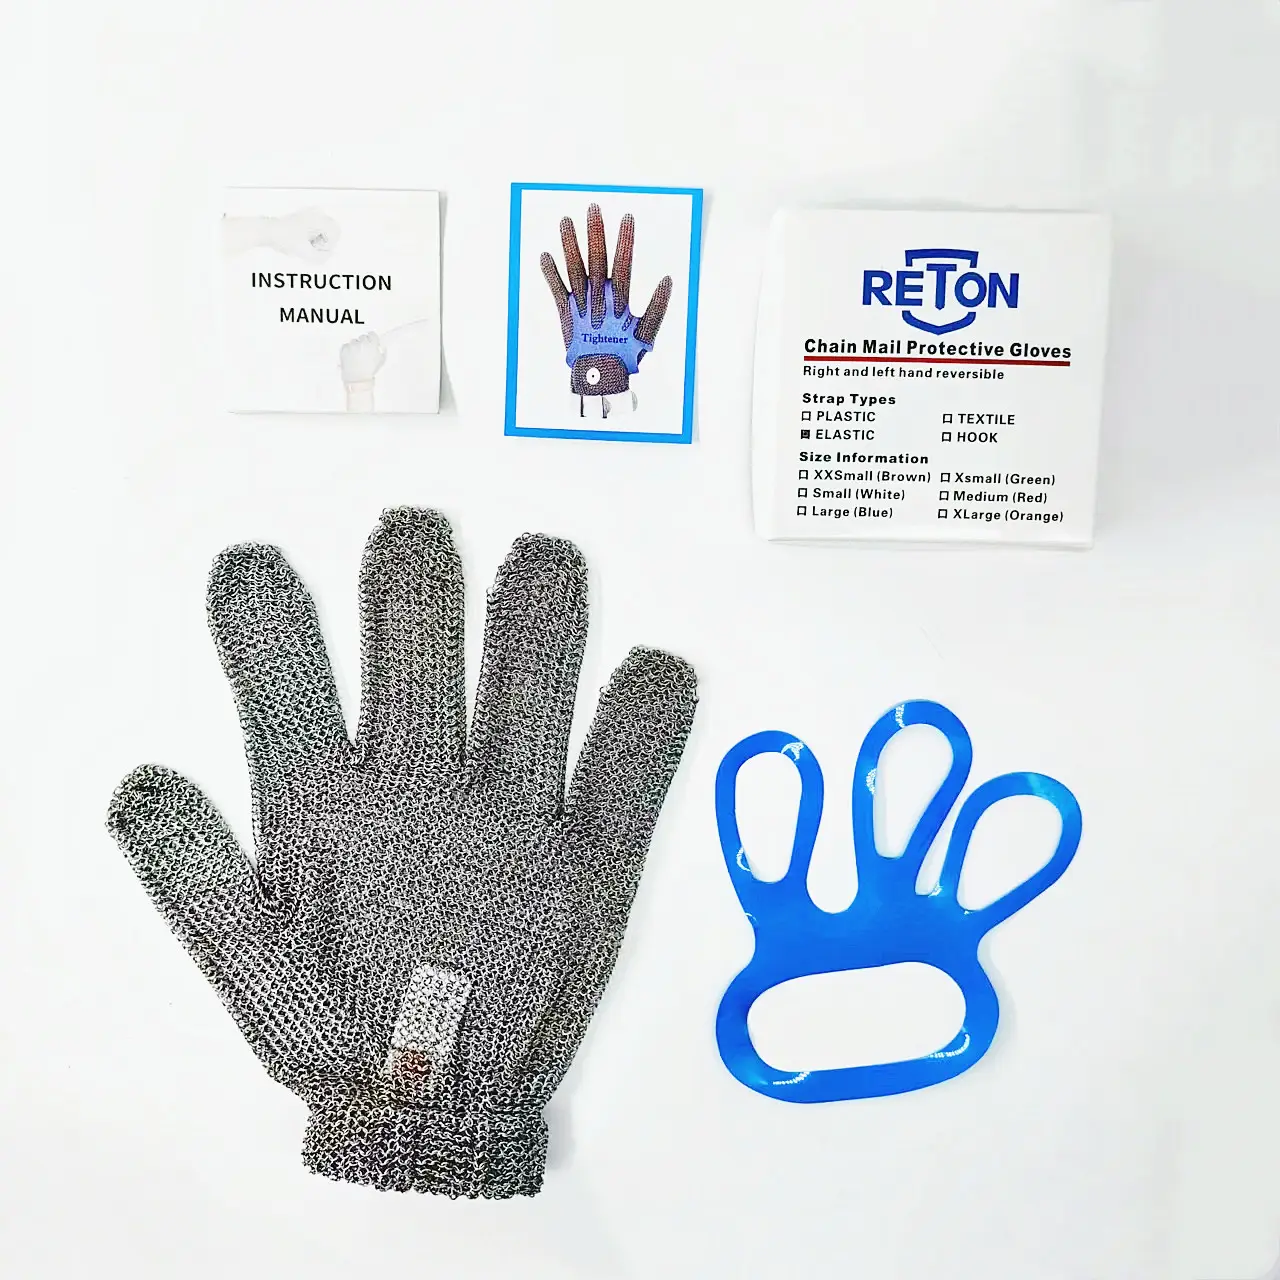 Cut resistant Steel mesh glove with Spring Strap for Butcher Working Hand Safety